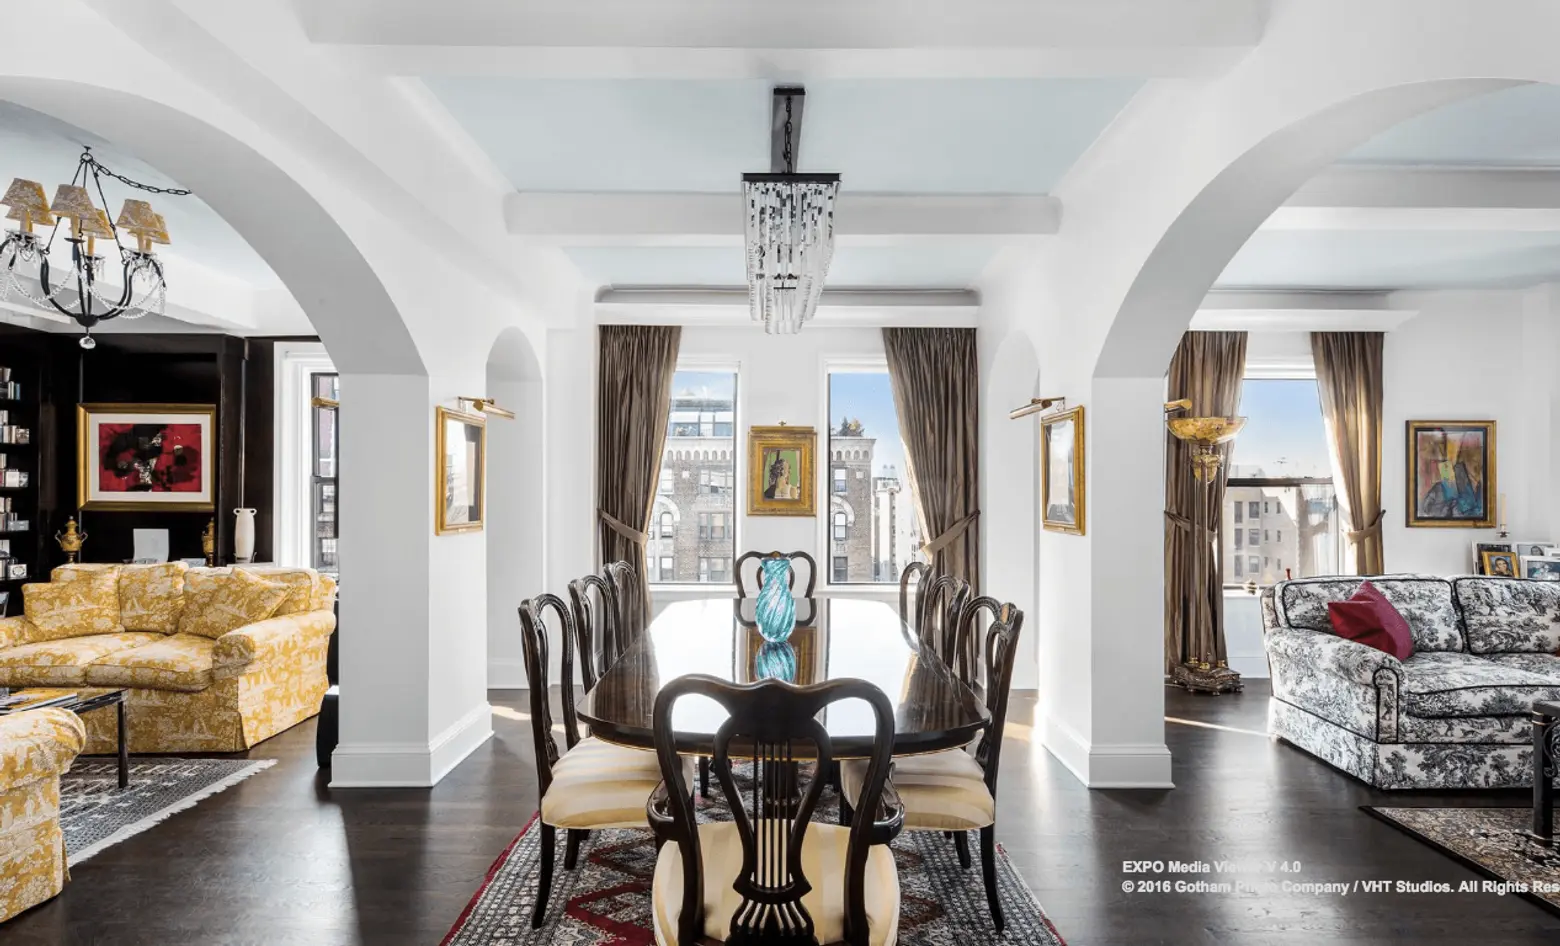 For $9.6M, an elegant Spanish Colonial condo awaits on the Upper East Side